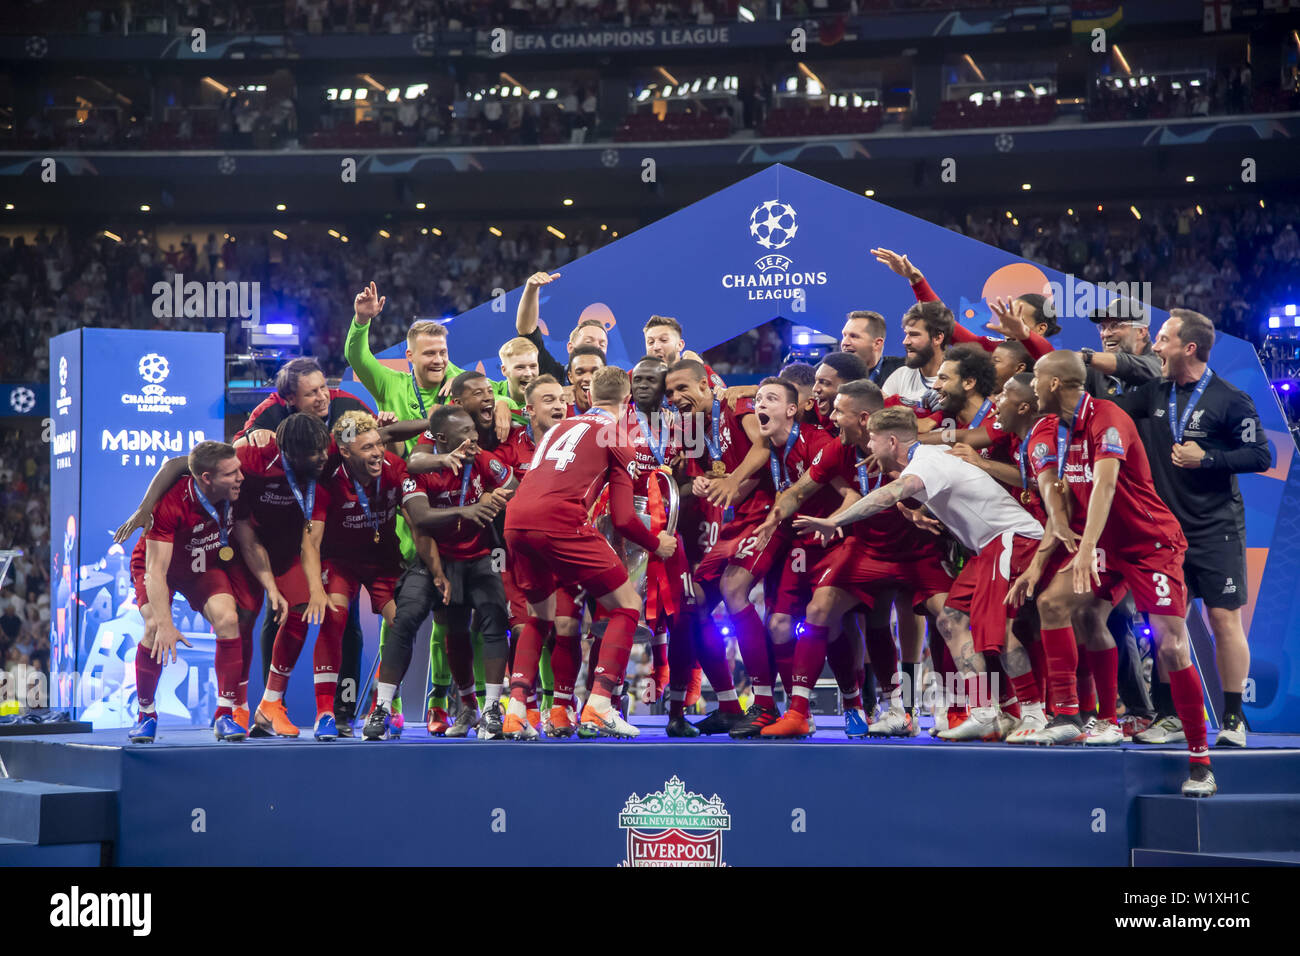 Liverpool FC V Tottenham Hotspur during the 2019 Champions League Final  held in Madrid, Spain. Liverpool won the game 2-0 to lift the trophy for  the 6th time. Featuring: Celebrations Where: Madrid,